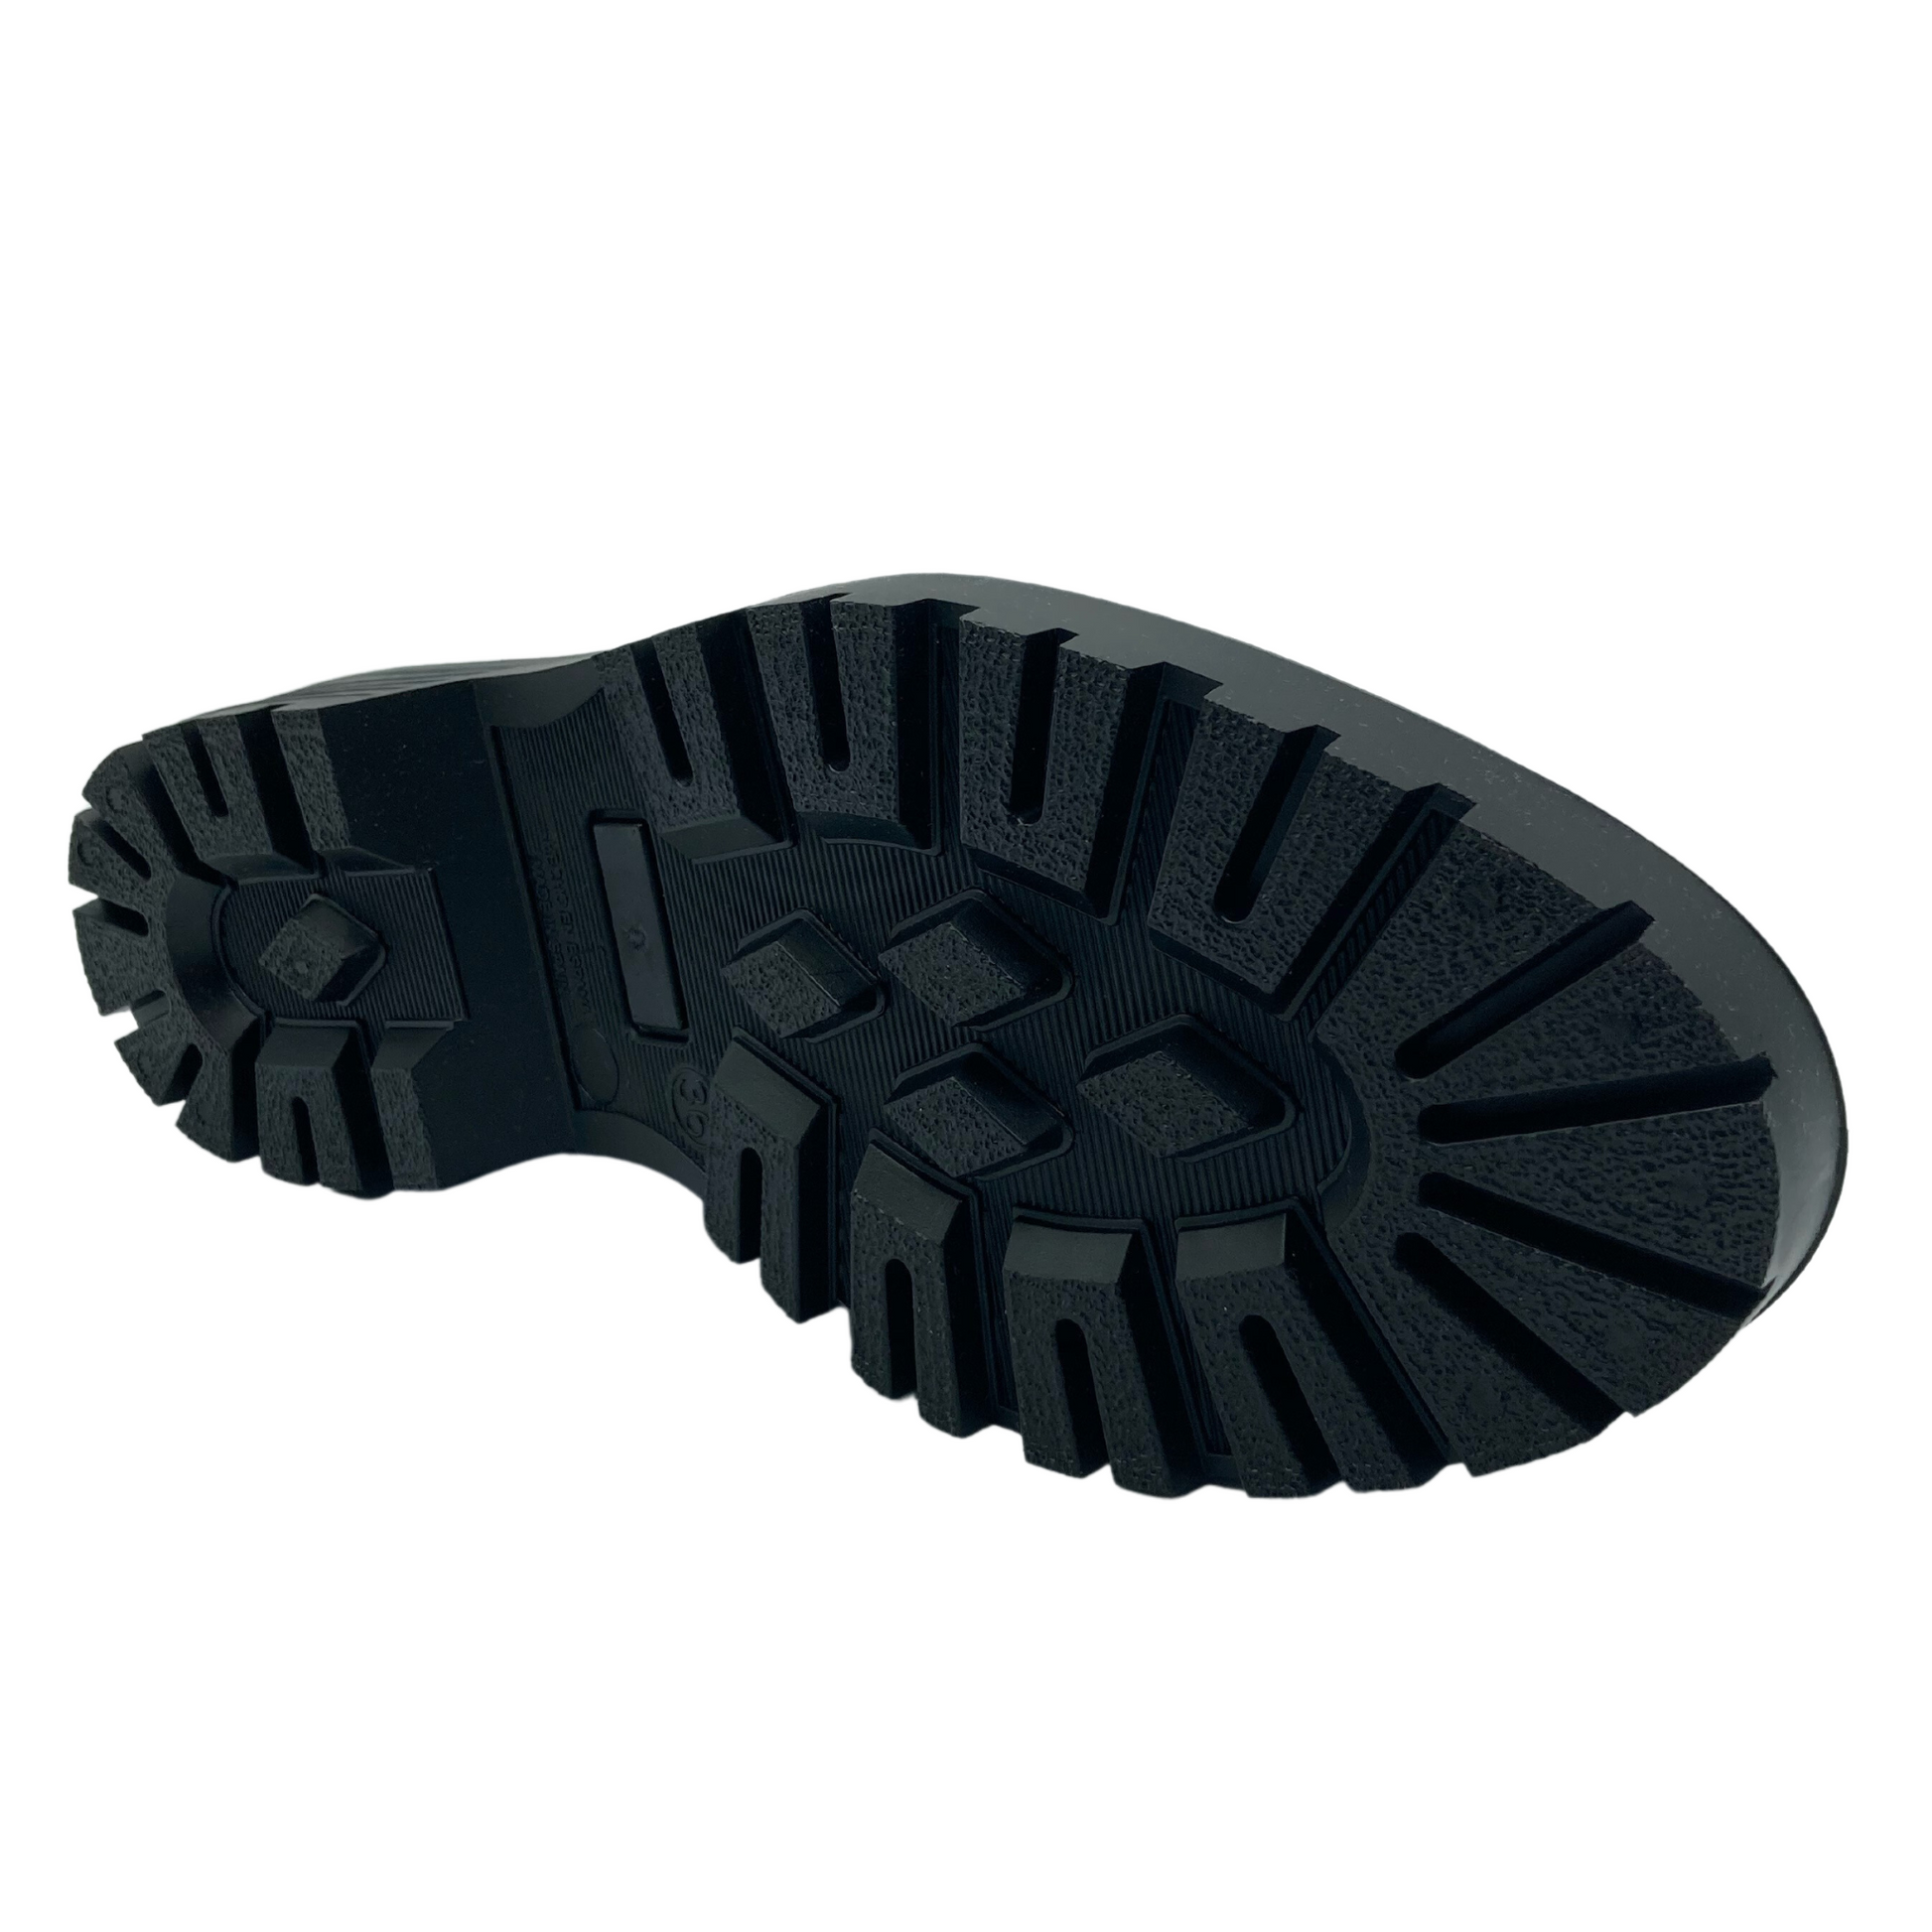 Bottom view of short rain boot with black slip resistant rubber sole